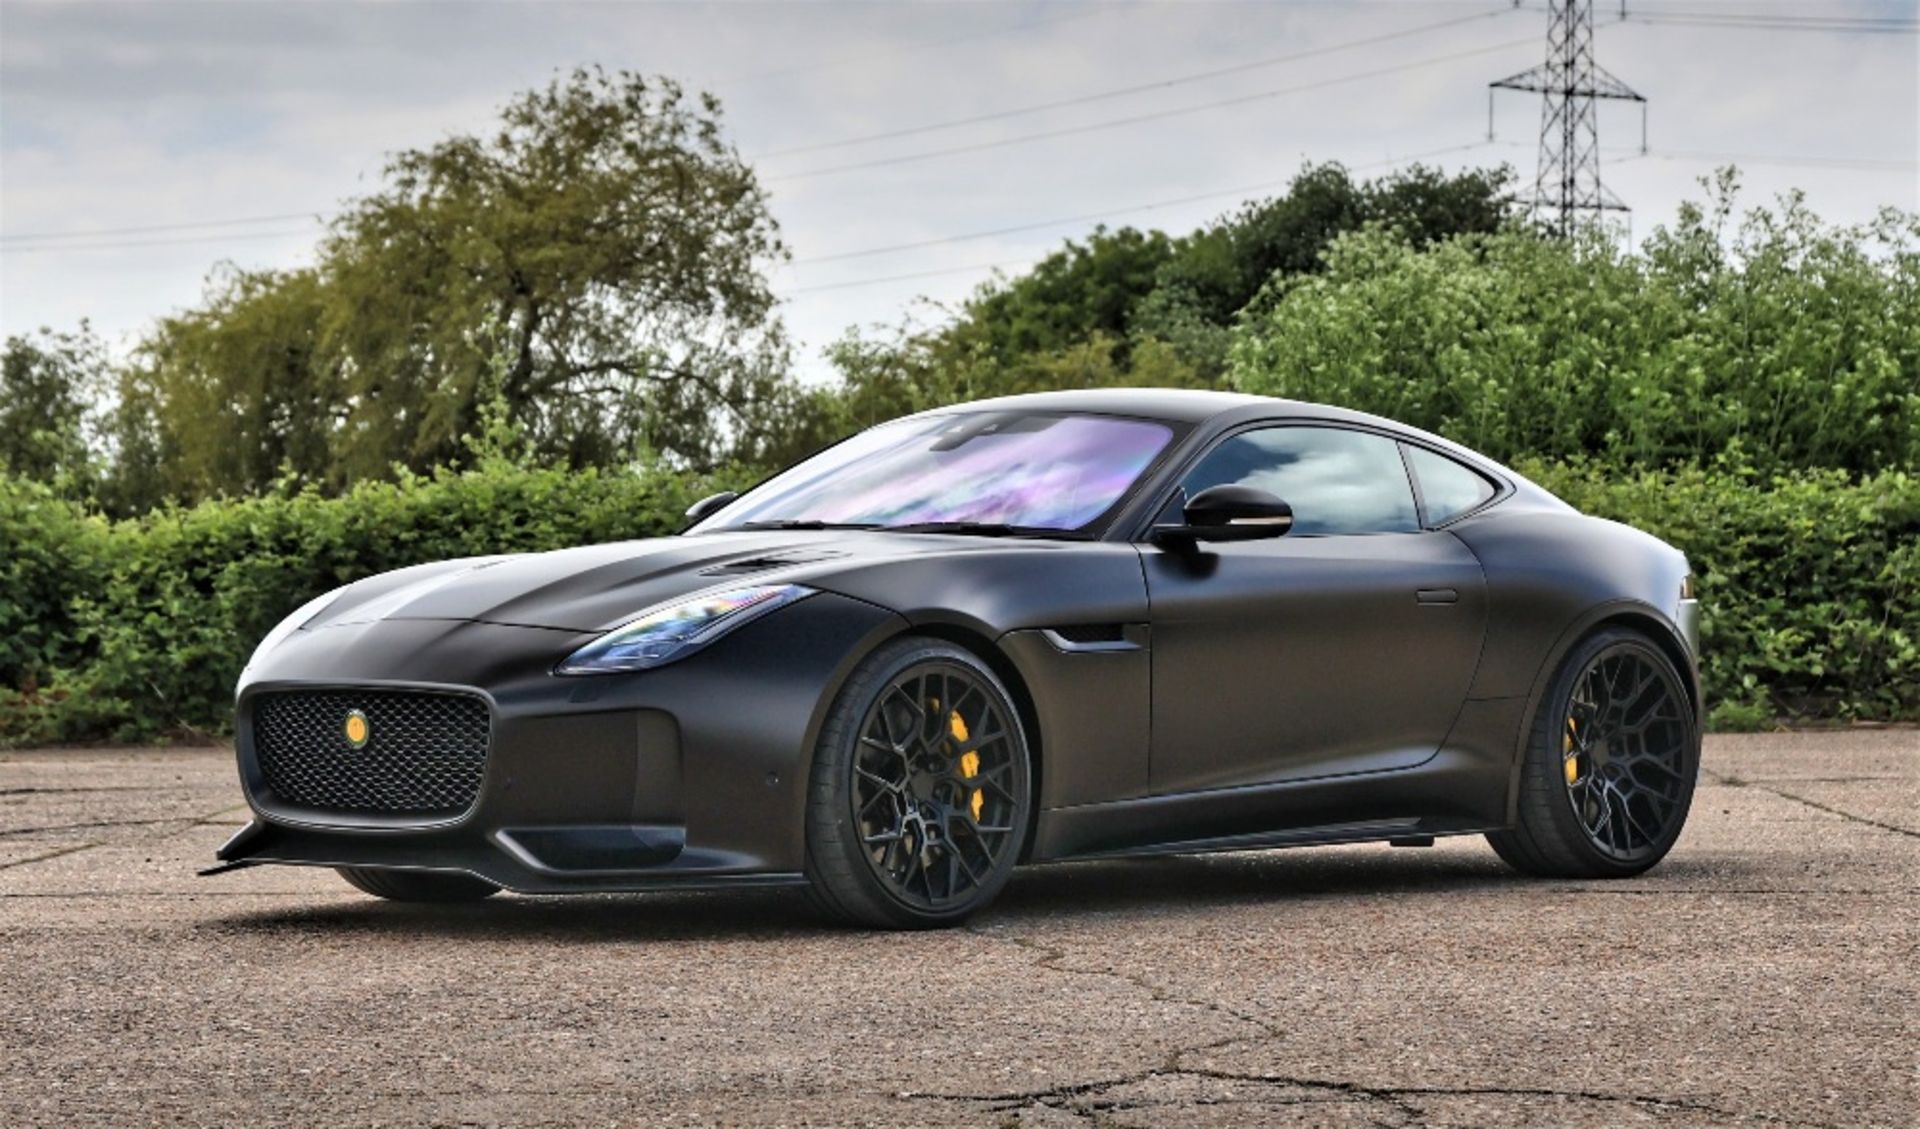 2019 LISTER LFT-666 COUPE  Registration Number: LD19 KCX Chassis Number: SAJDA1AE6LCK63807 - Bild 2 aus 29